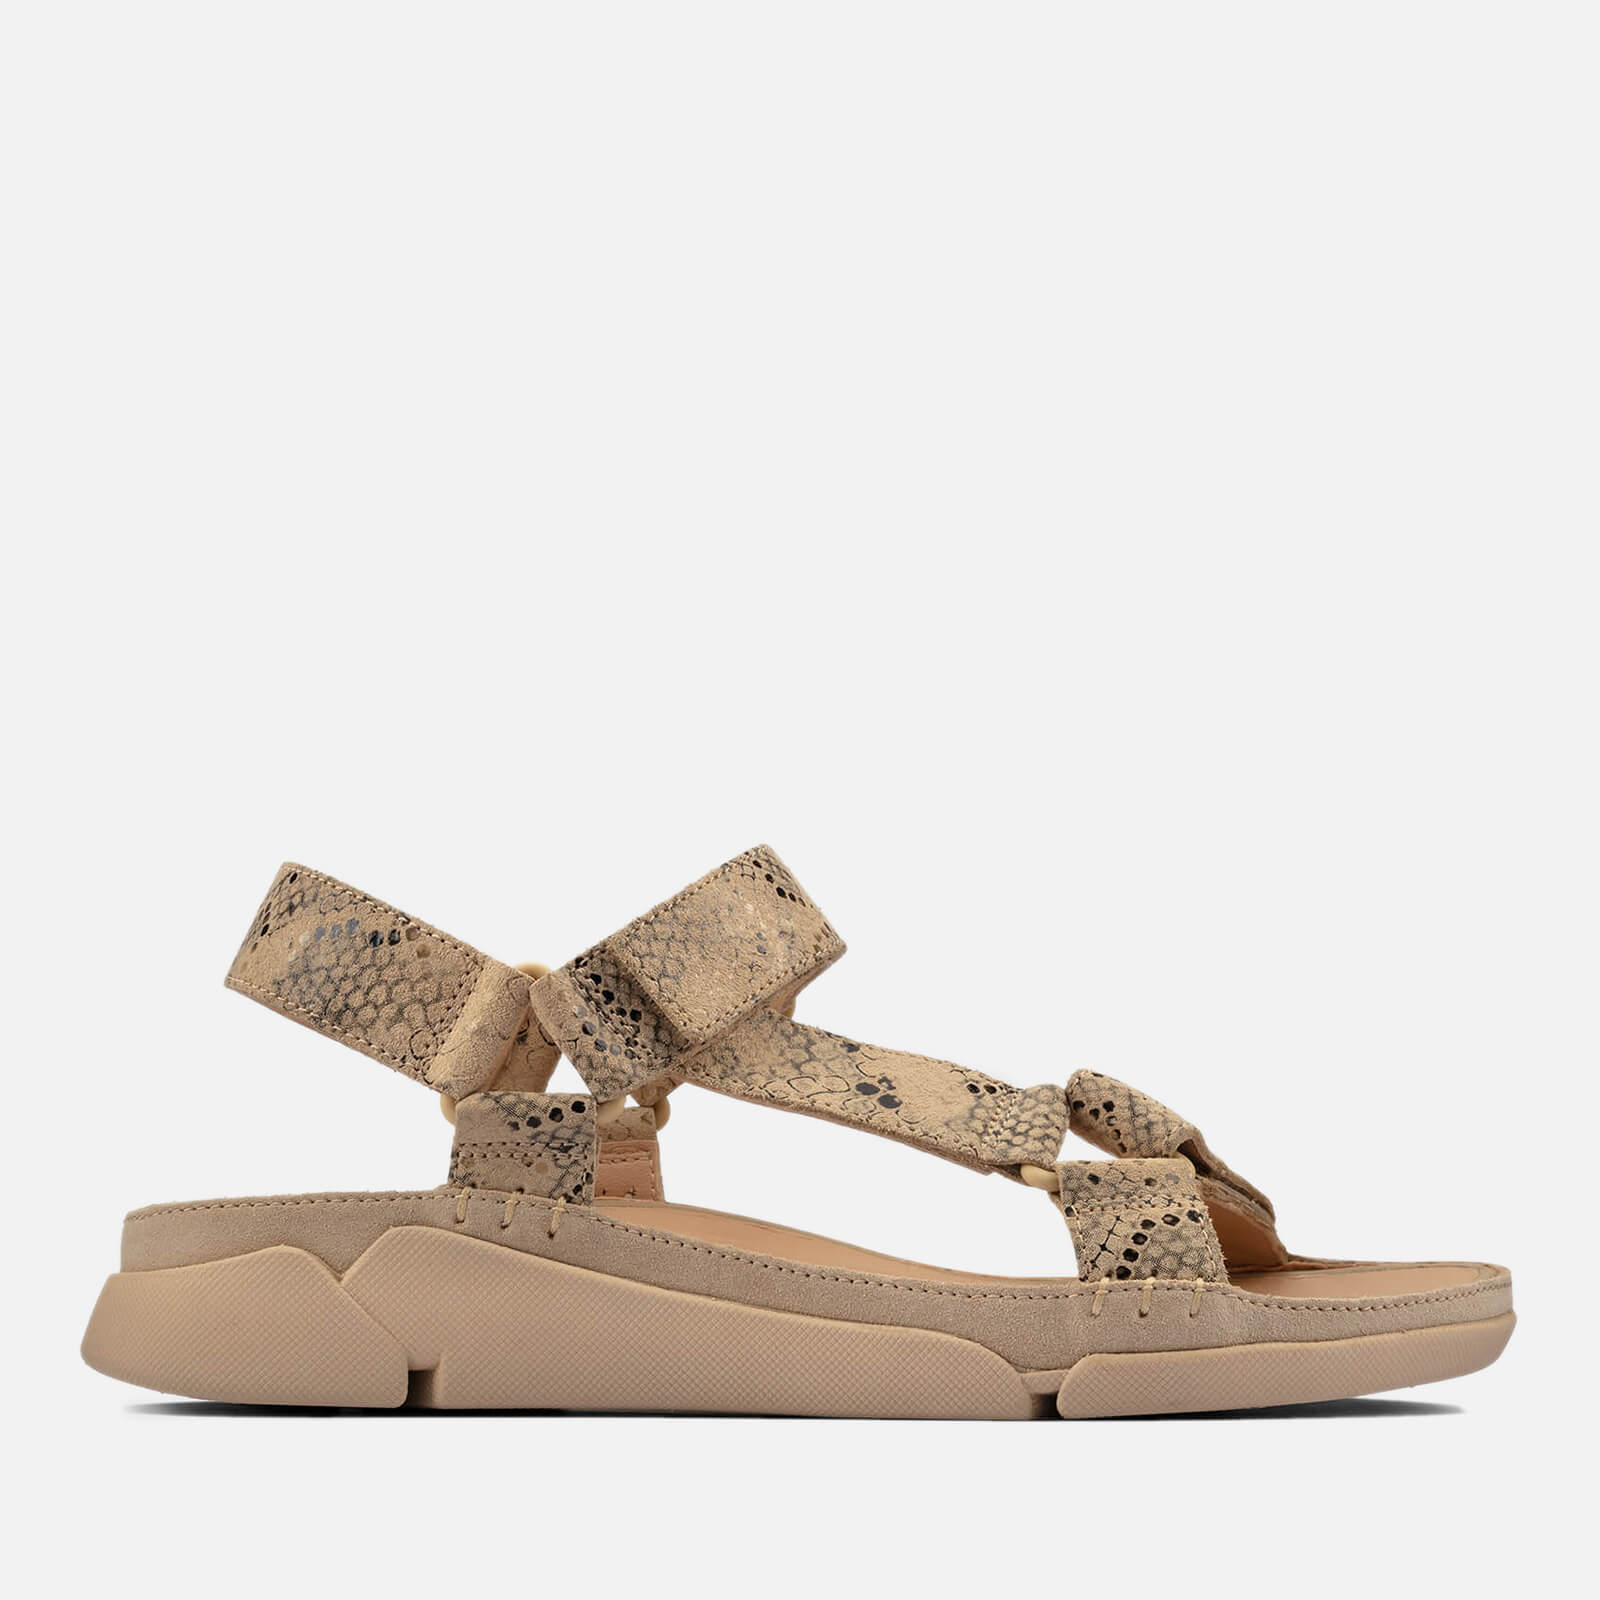 Clarks Women’s Tri Sporty Sandals - Taupe Snake